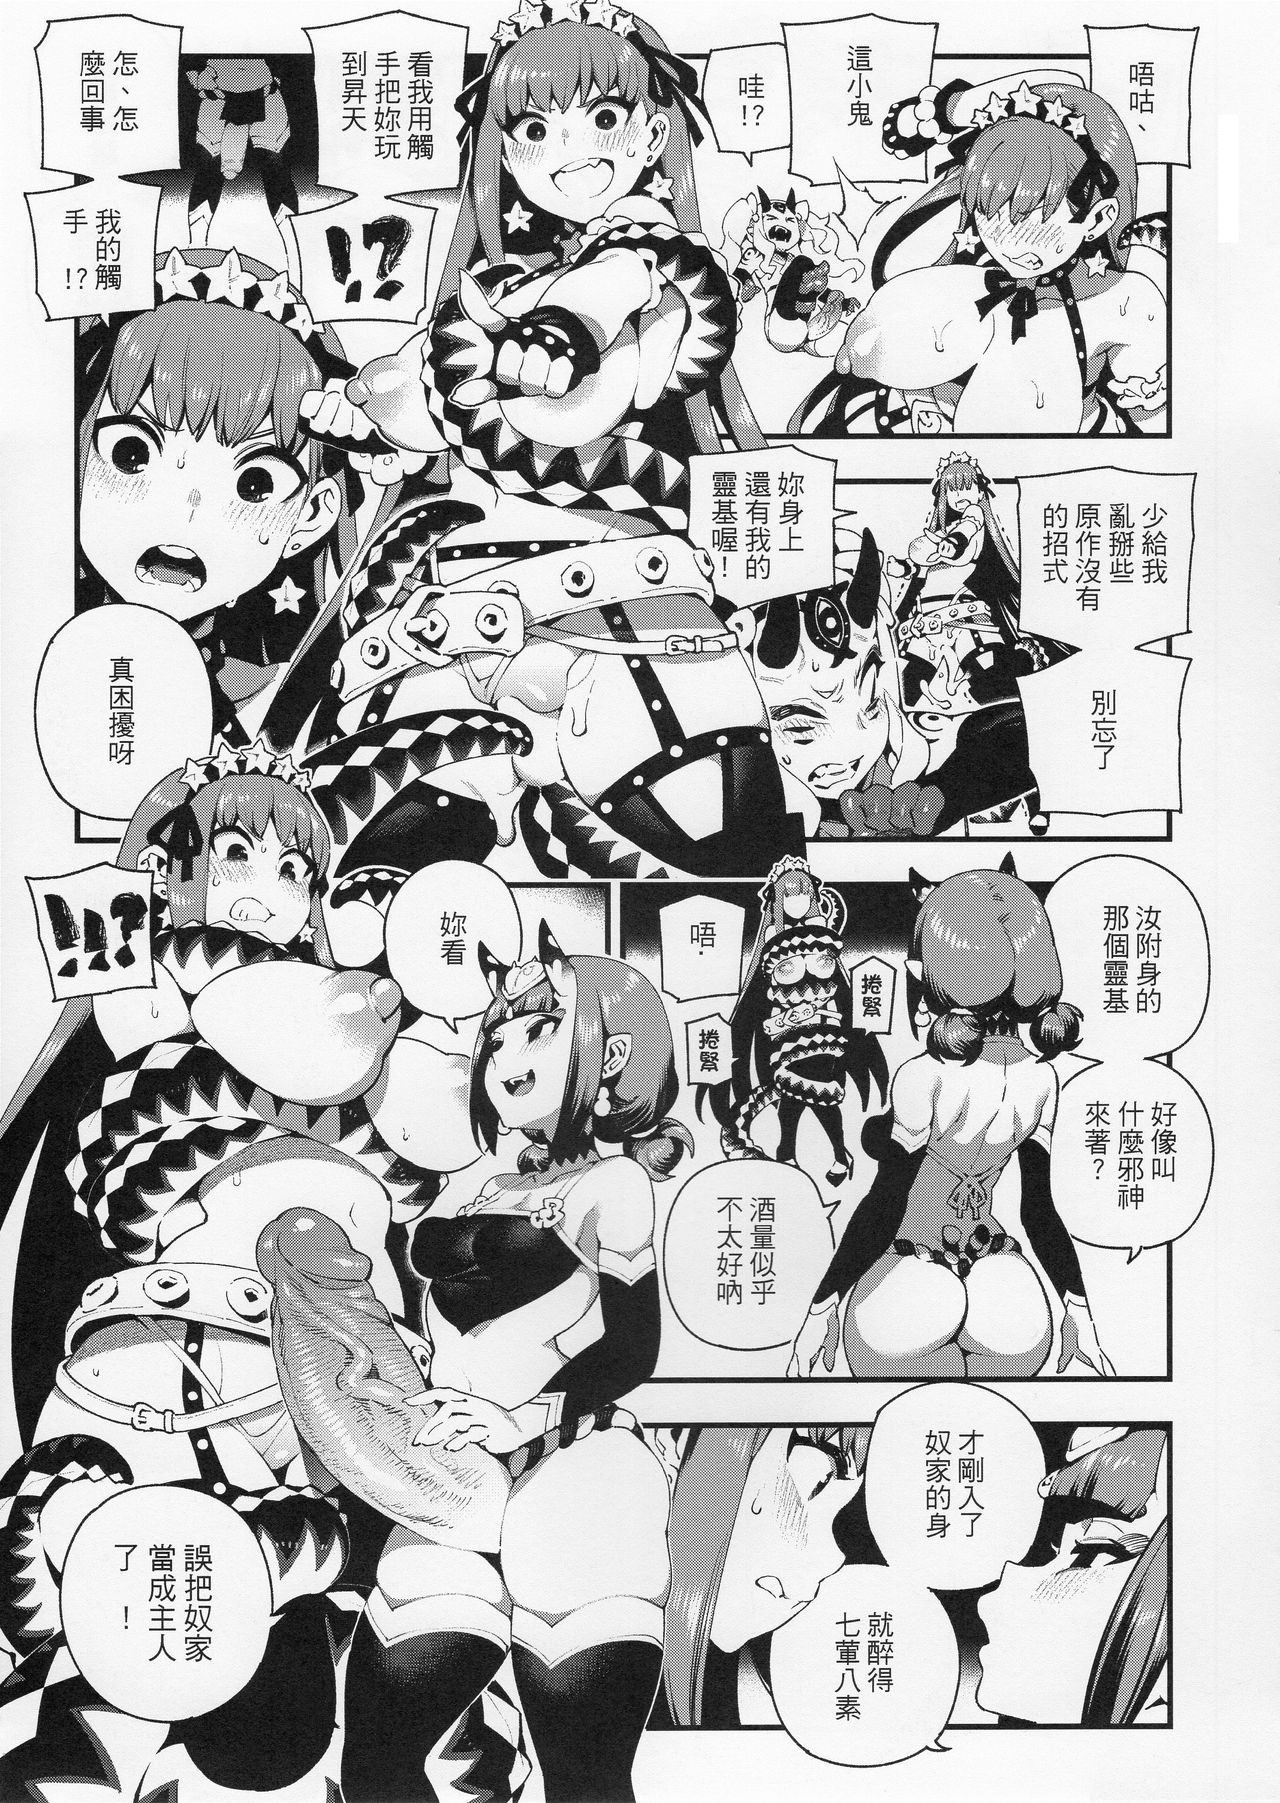 (FF33) [Bear Hand (Fishine, Ireading)] JiaLeiDi KuangRe ． Guei & Mo (Fate/Grand Order) [Chinese] (FF33) [熊掌社 (魚生、俺正讀)] 迦勒底狂熱．鬼&魔 (Fate/Grand Order) [中国語]